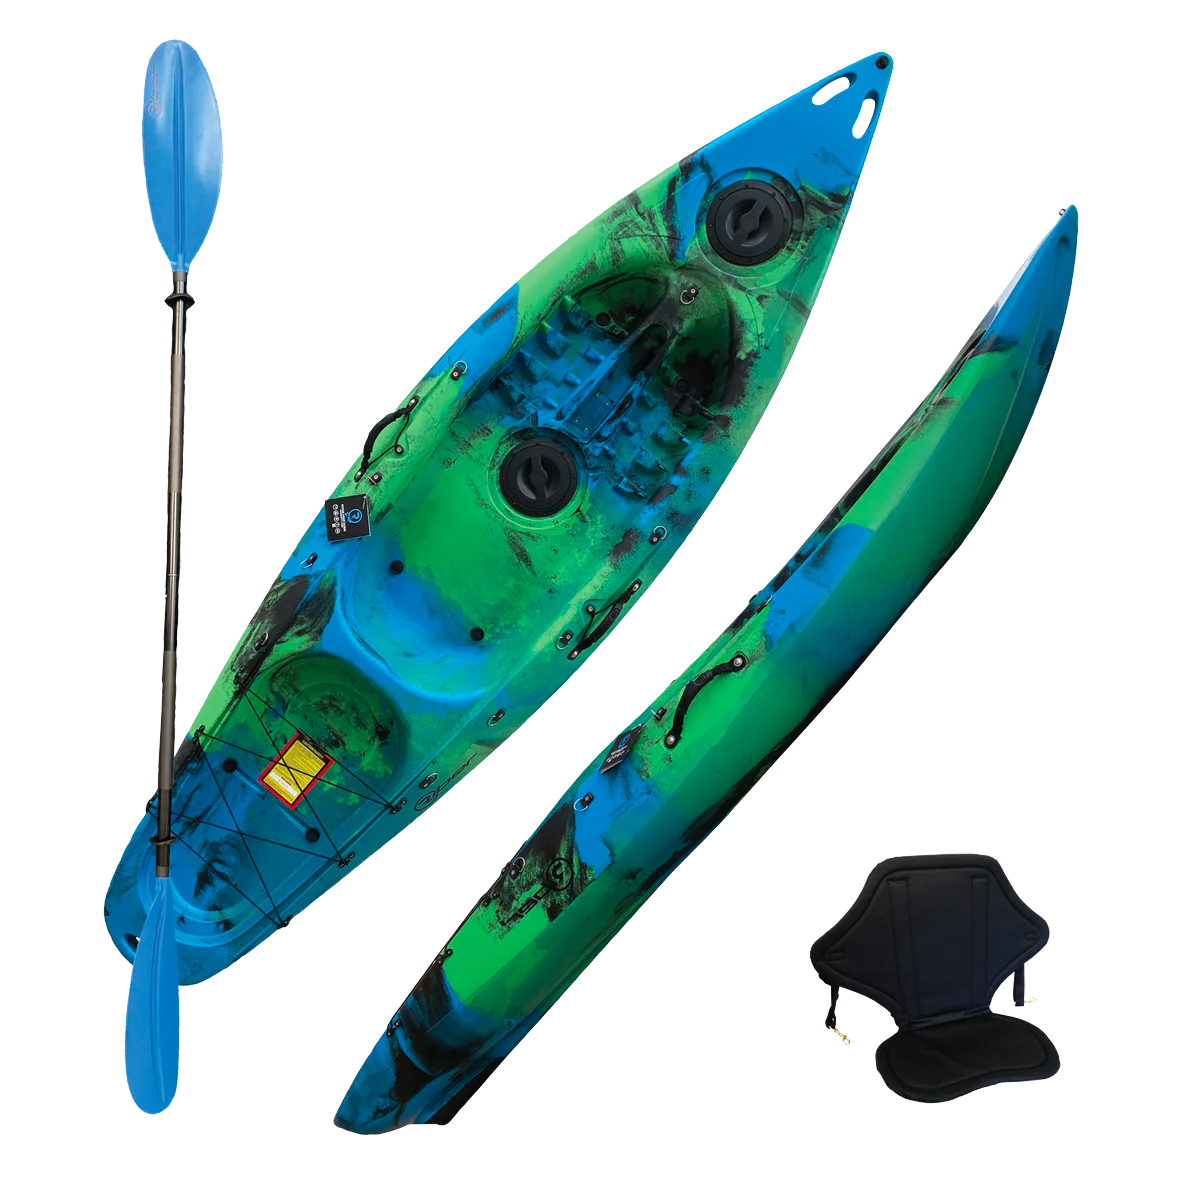 Deluxe_Sit-On-Top_Kayak_Green-Blue-Black-ExcelBoats